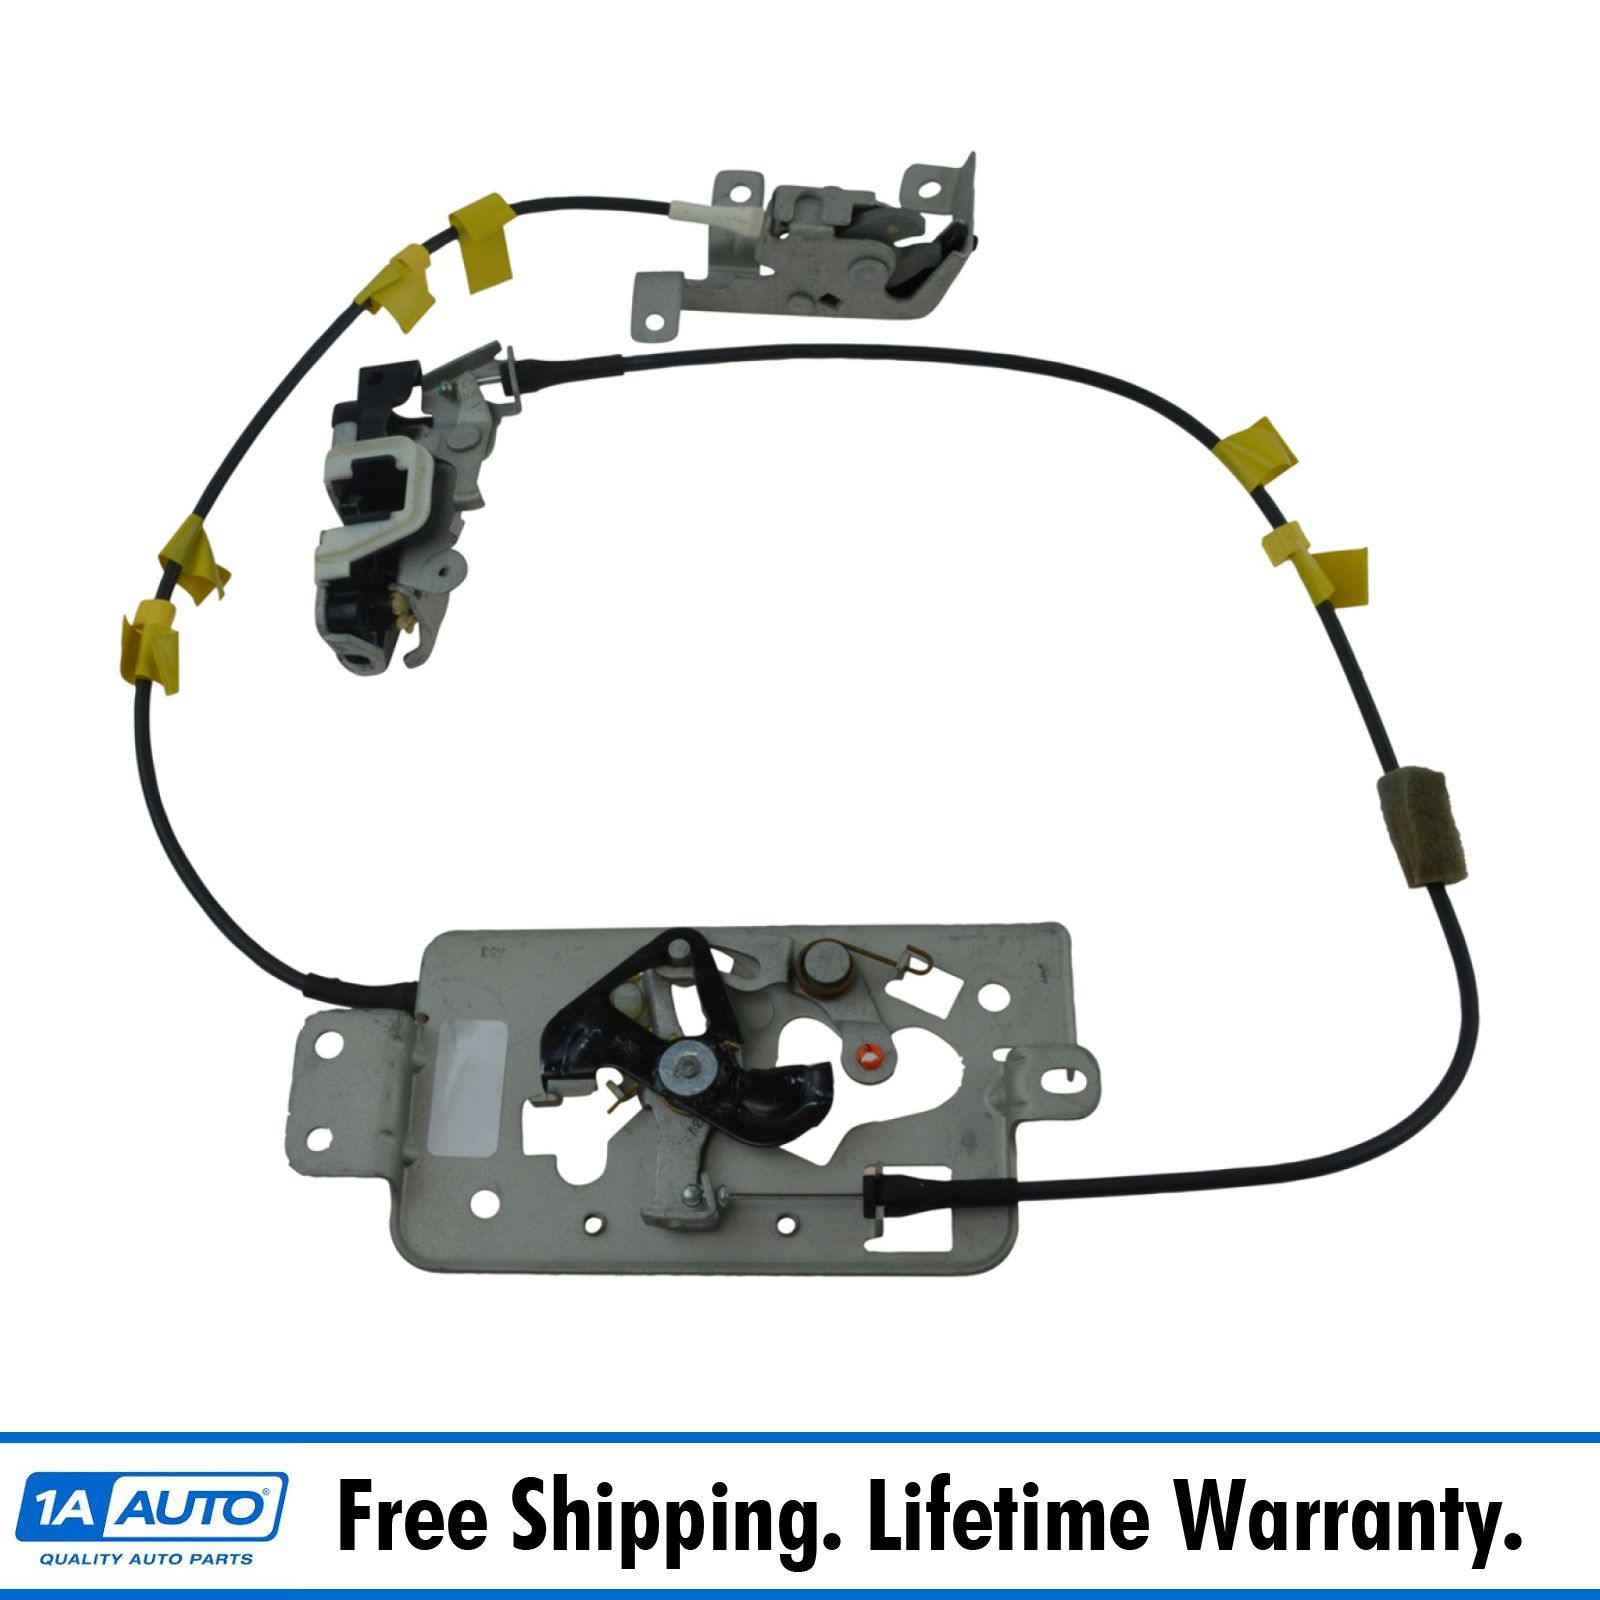 Details About Oem 8l3z 18264a01 B Door Latch Cable Driver Left Lh Rear For 04 08 Ford F150